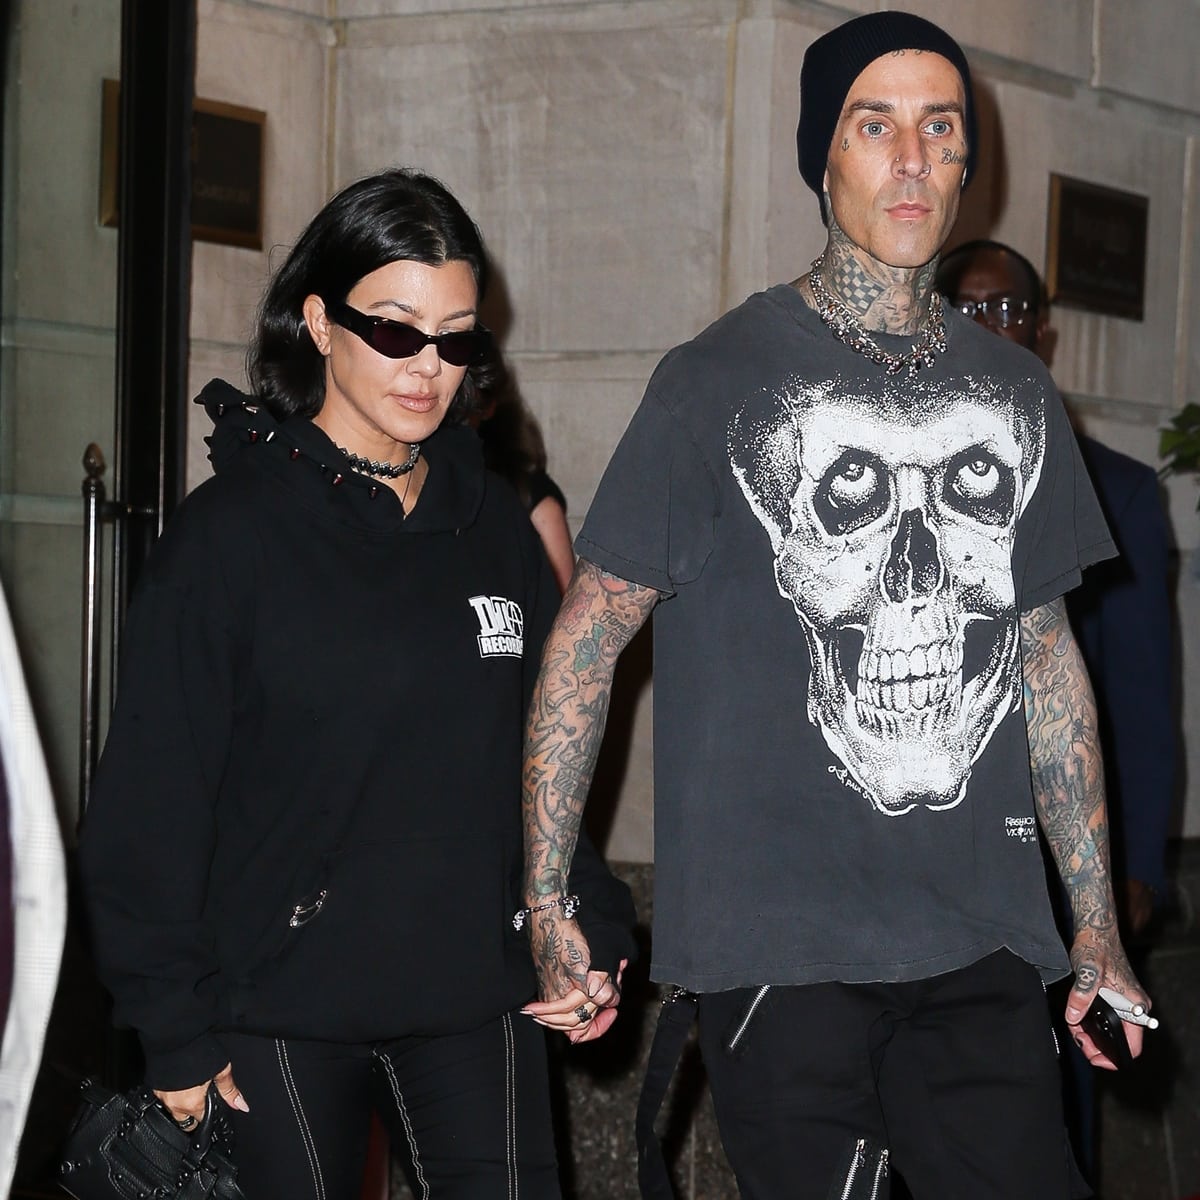 Kourtney Kardashian and Travis Barker hand-in-hand leaving their hotel in NYC